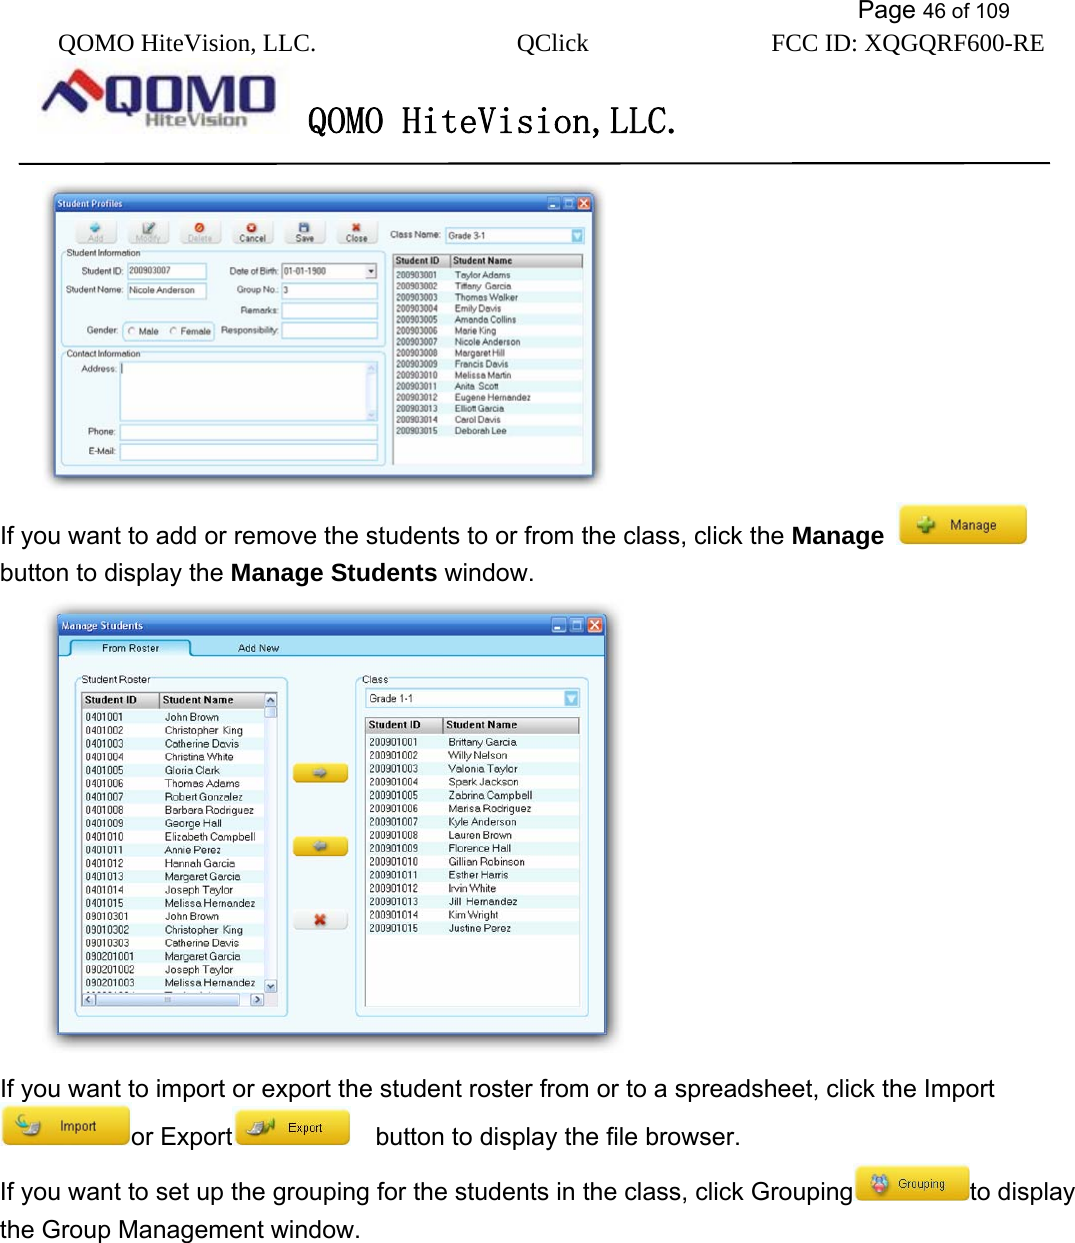           Page 46 of 109 QOMO HiteVision, LLC.  QClick        FCC ID: XQGQRF600-RE     QOMO HiteVision,LLC.    If you want to add or remove the students to or from the class, click the Manage   button to display the Manage Students window.  If you want to import or export the student roster from or to a spreadsheet, click the Import or Export     button to display the file browser. If you want to set up the grouping for the students in the class, click Grouping to display the Group Management window.   